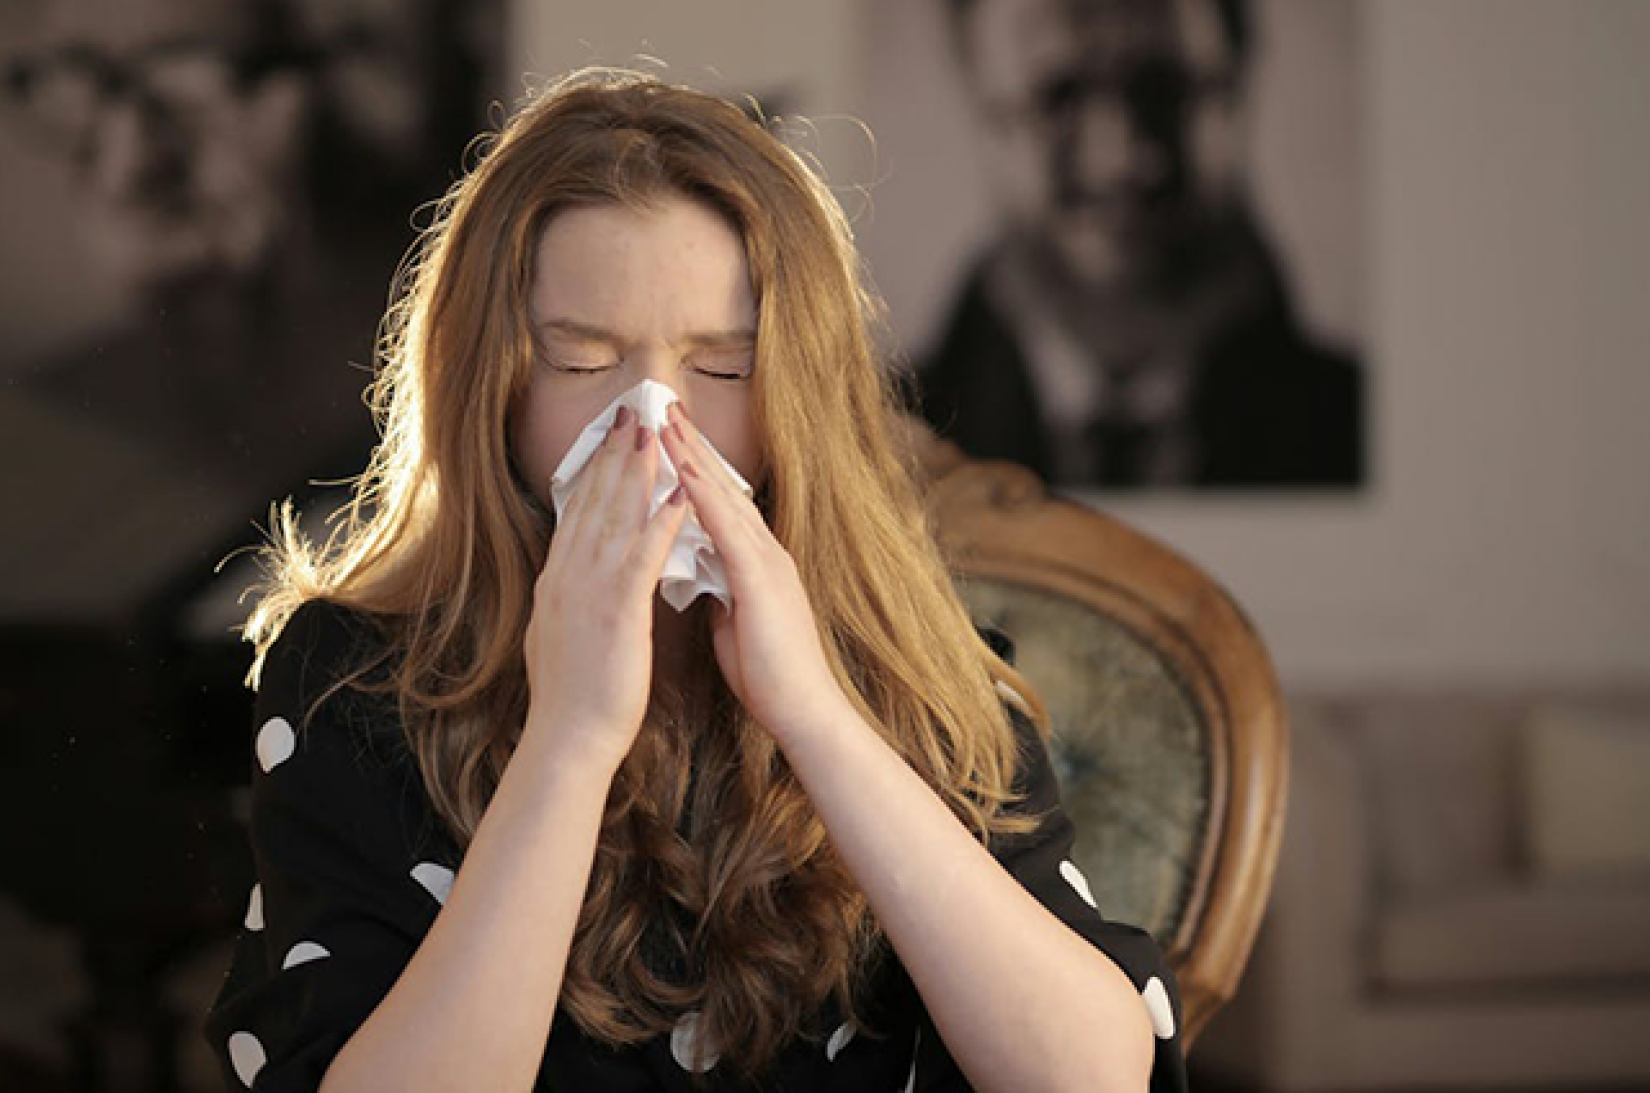 A young woman blowing her nose with a tissue and her eyes closed